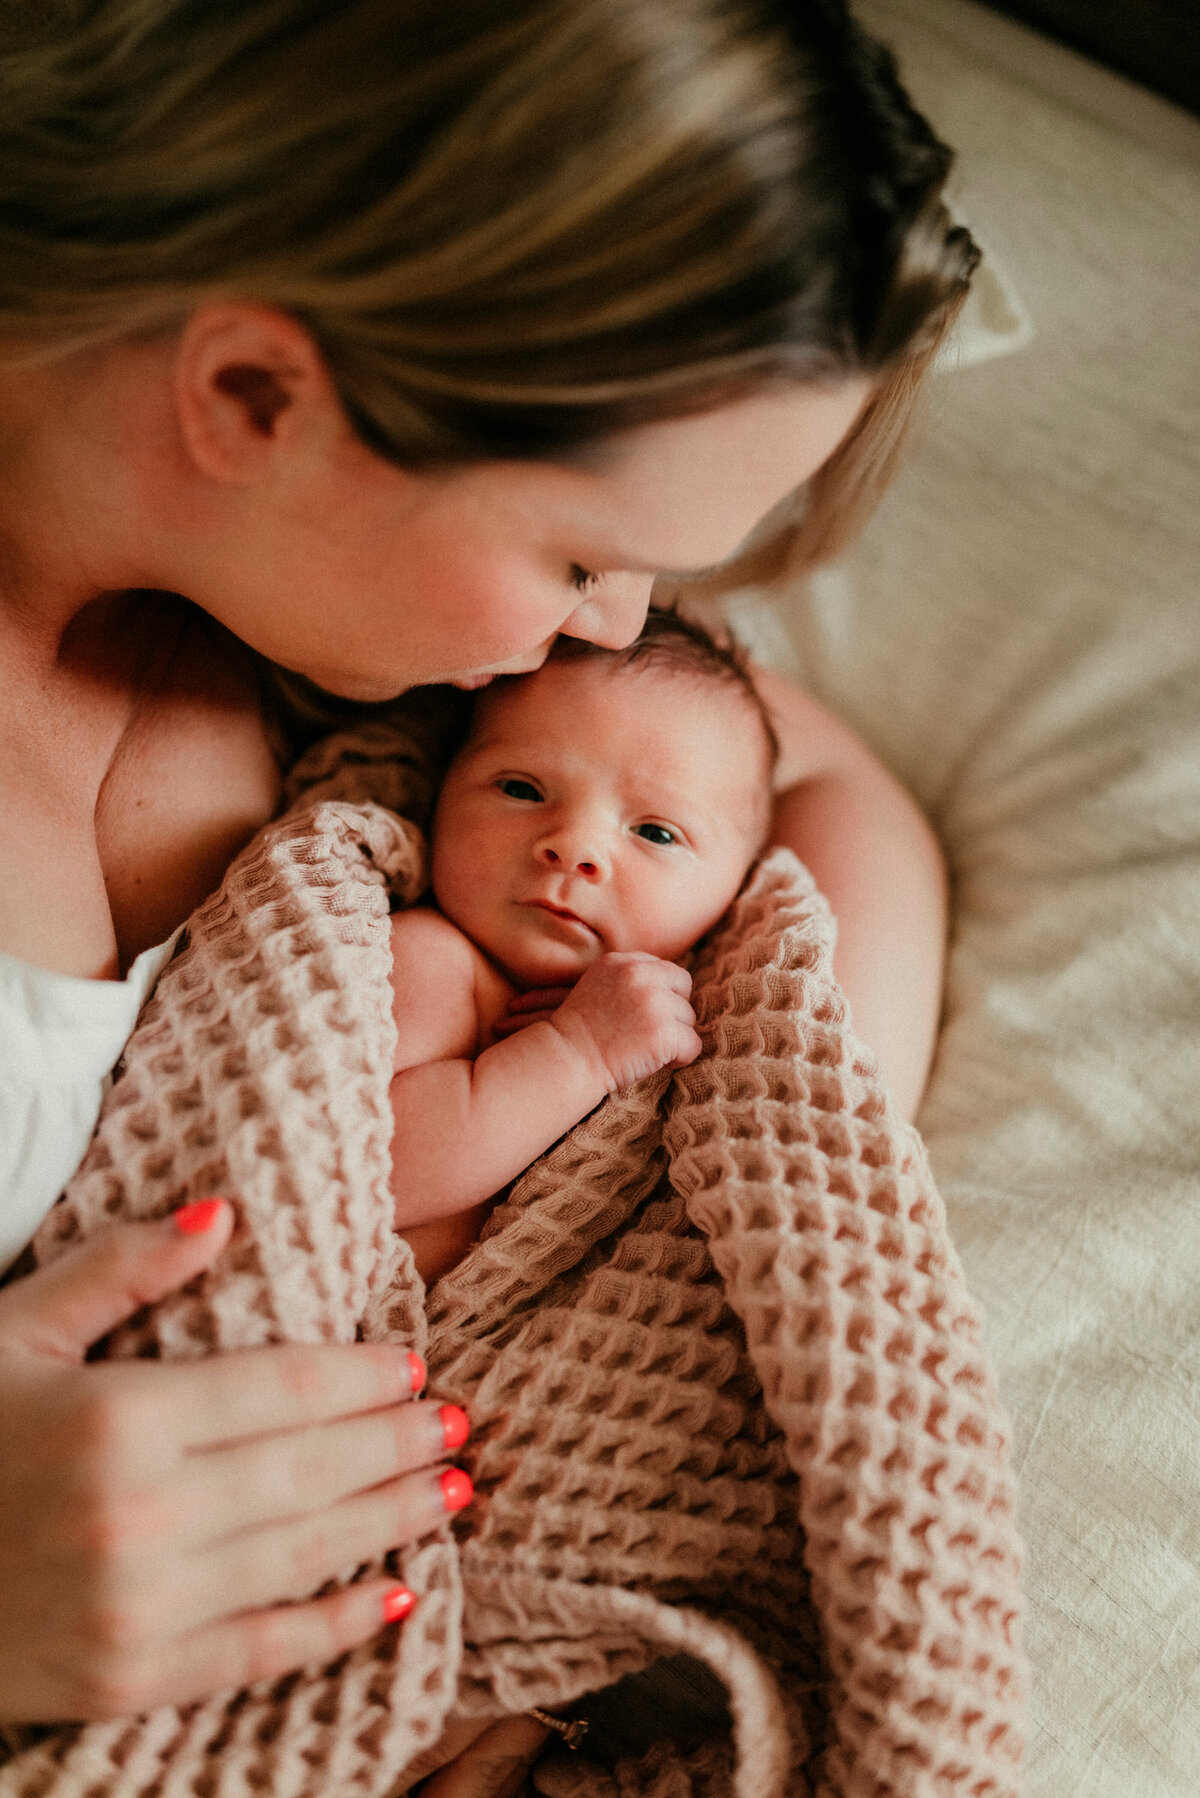 Discover dreamland harmony with St. Paul newborn photography at home. Shannon Kathleen Photography creates portraits that reflect the dreamy serenity of your newborn in your family space